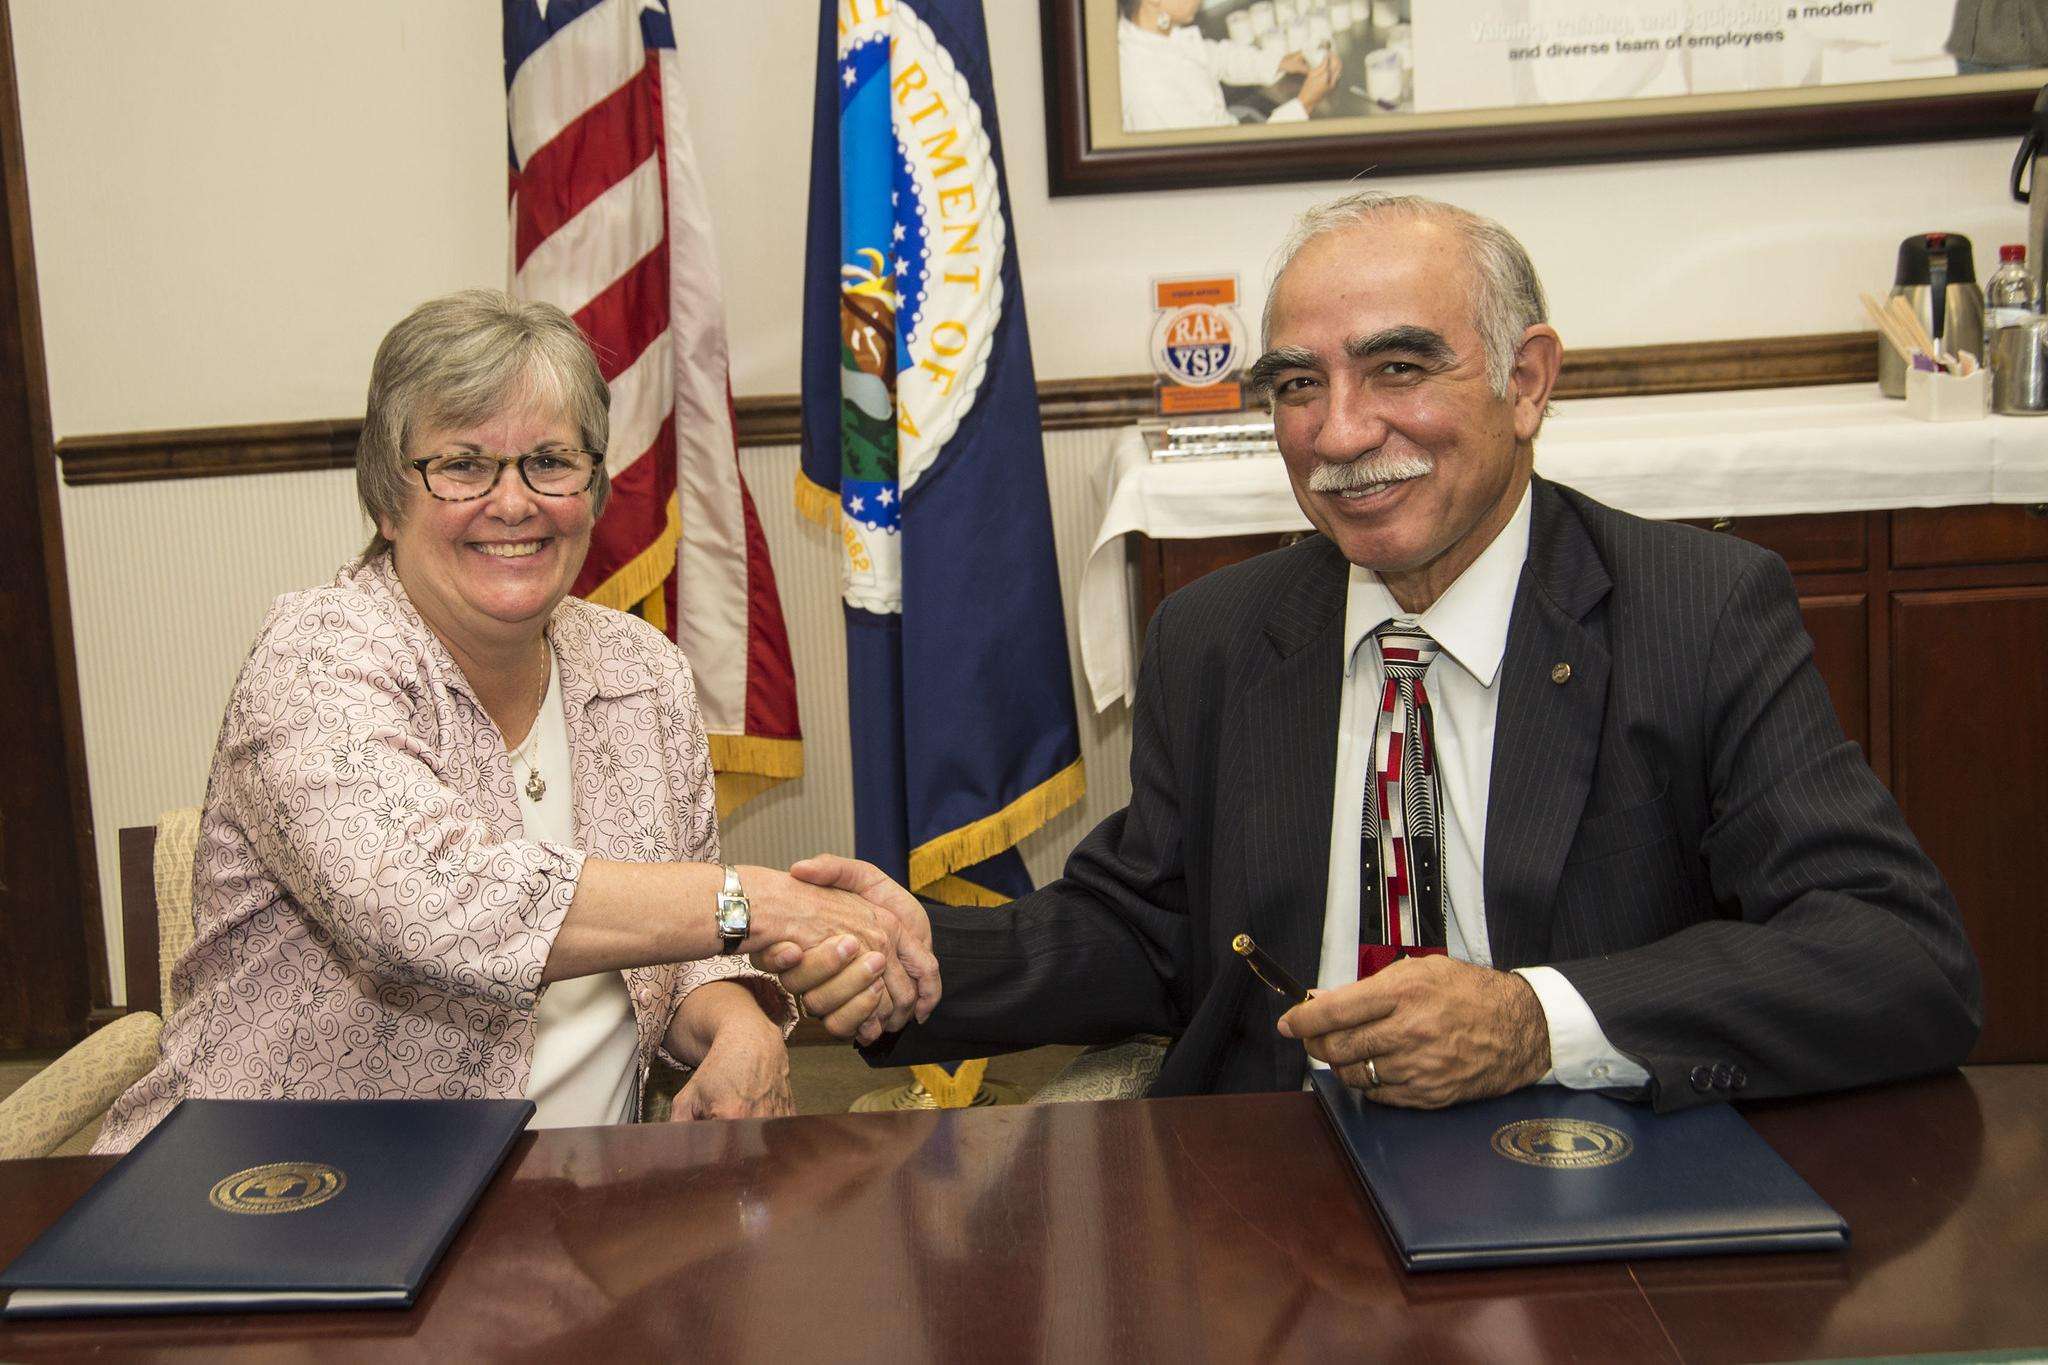 Woman and man sitting a table in front of USDA and U.S. flags shaking hands